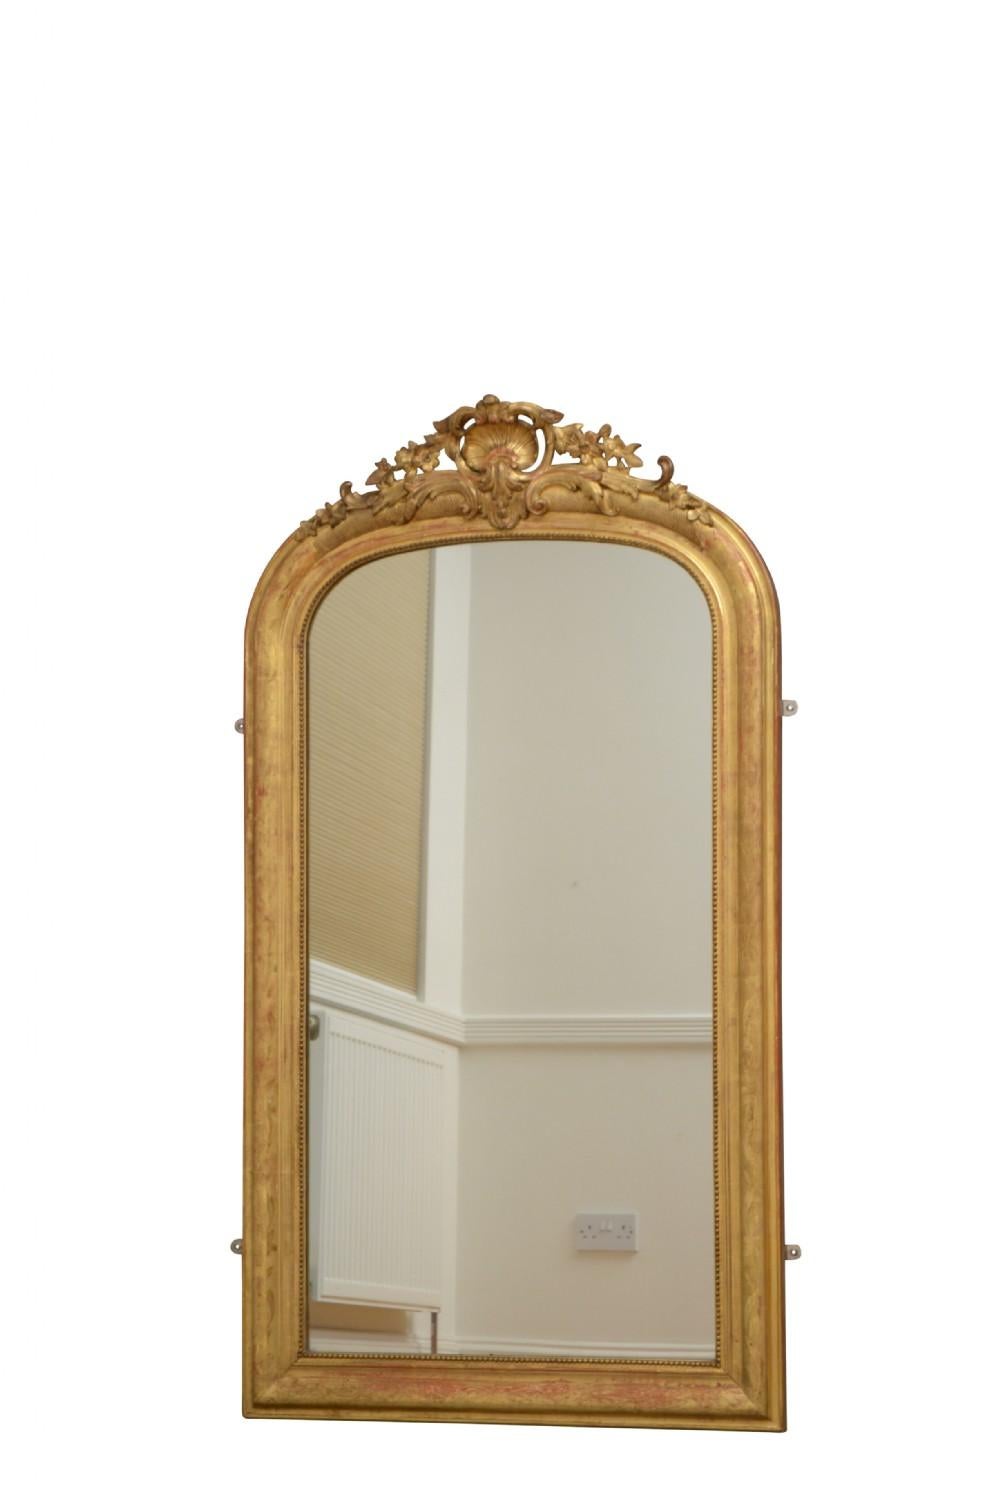 K0436 beautiful giltwood pier mirror, having original mirror with some foxing in finely decorated frame with foliage crest to centre. This antique mirror retains its original glass, original gilt and original backboards, all in excellent home ready